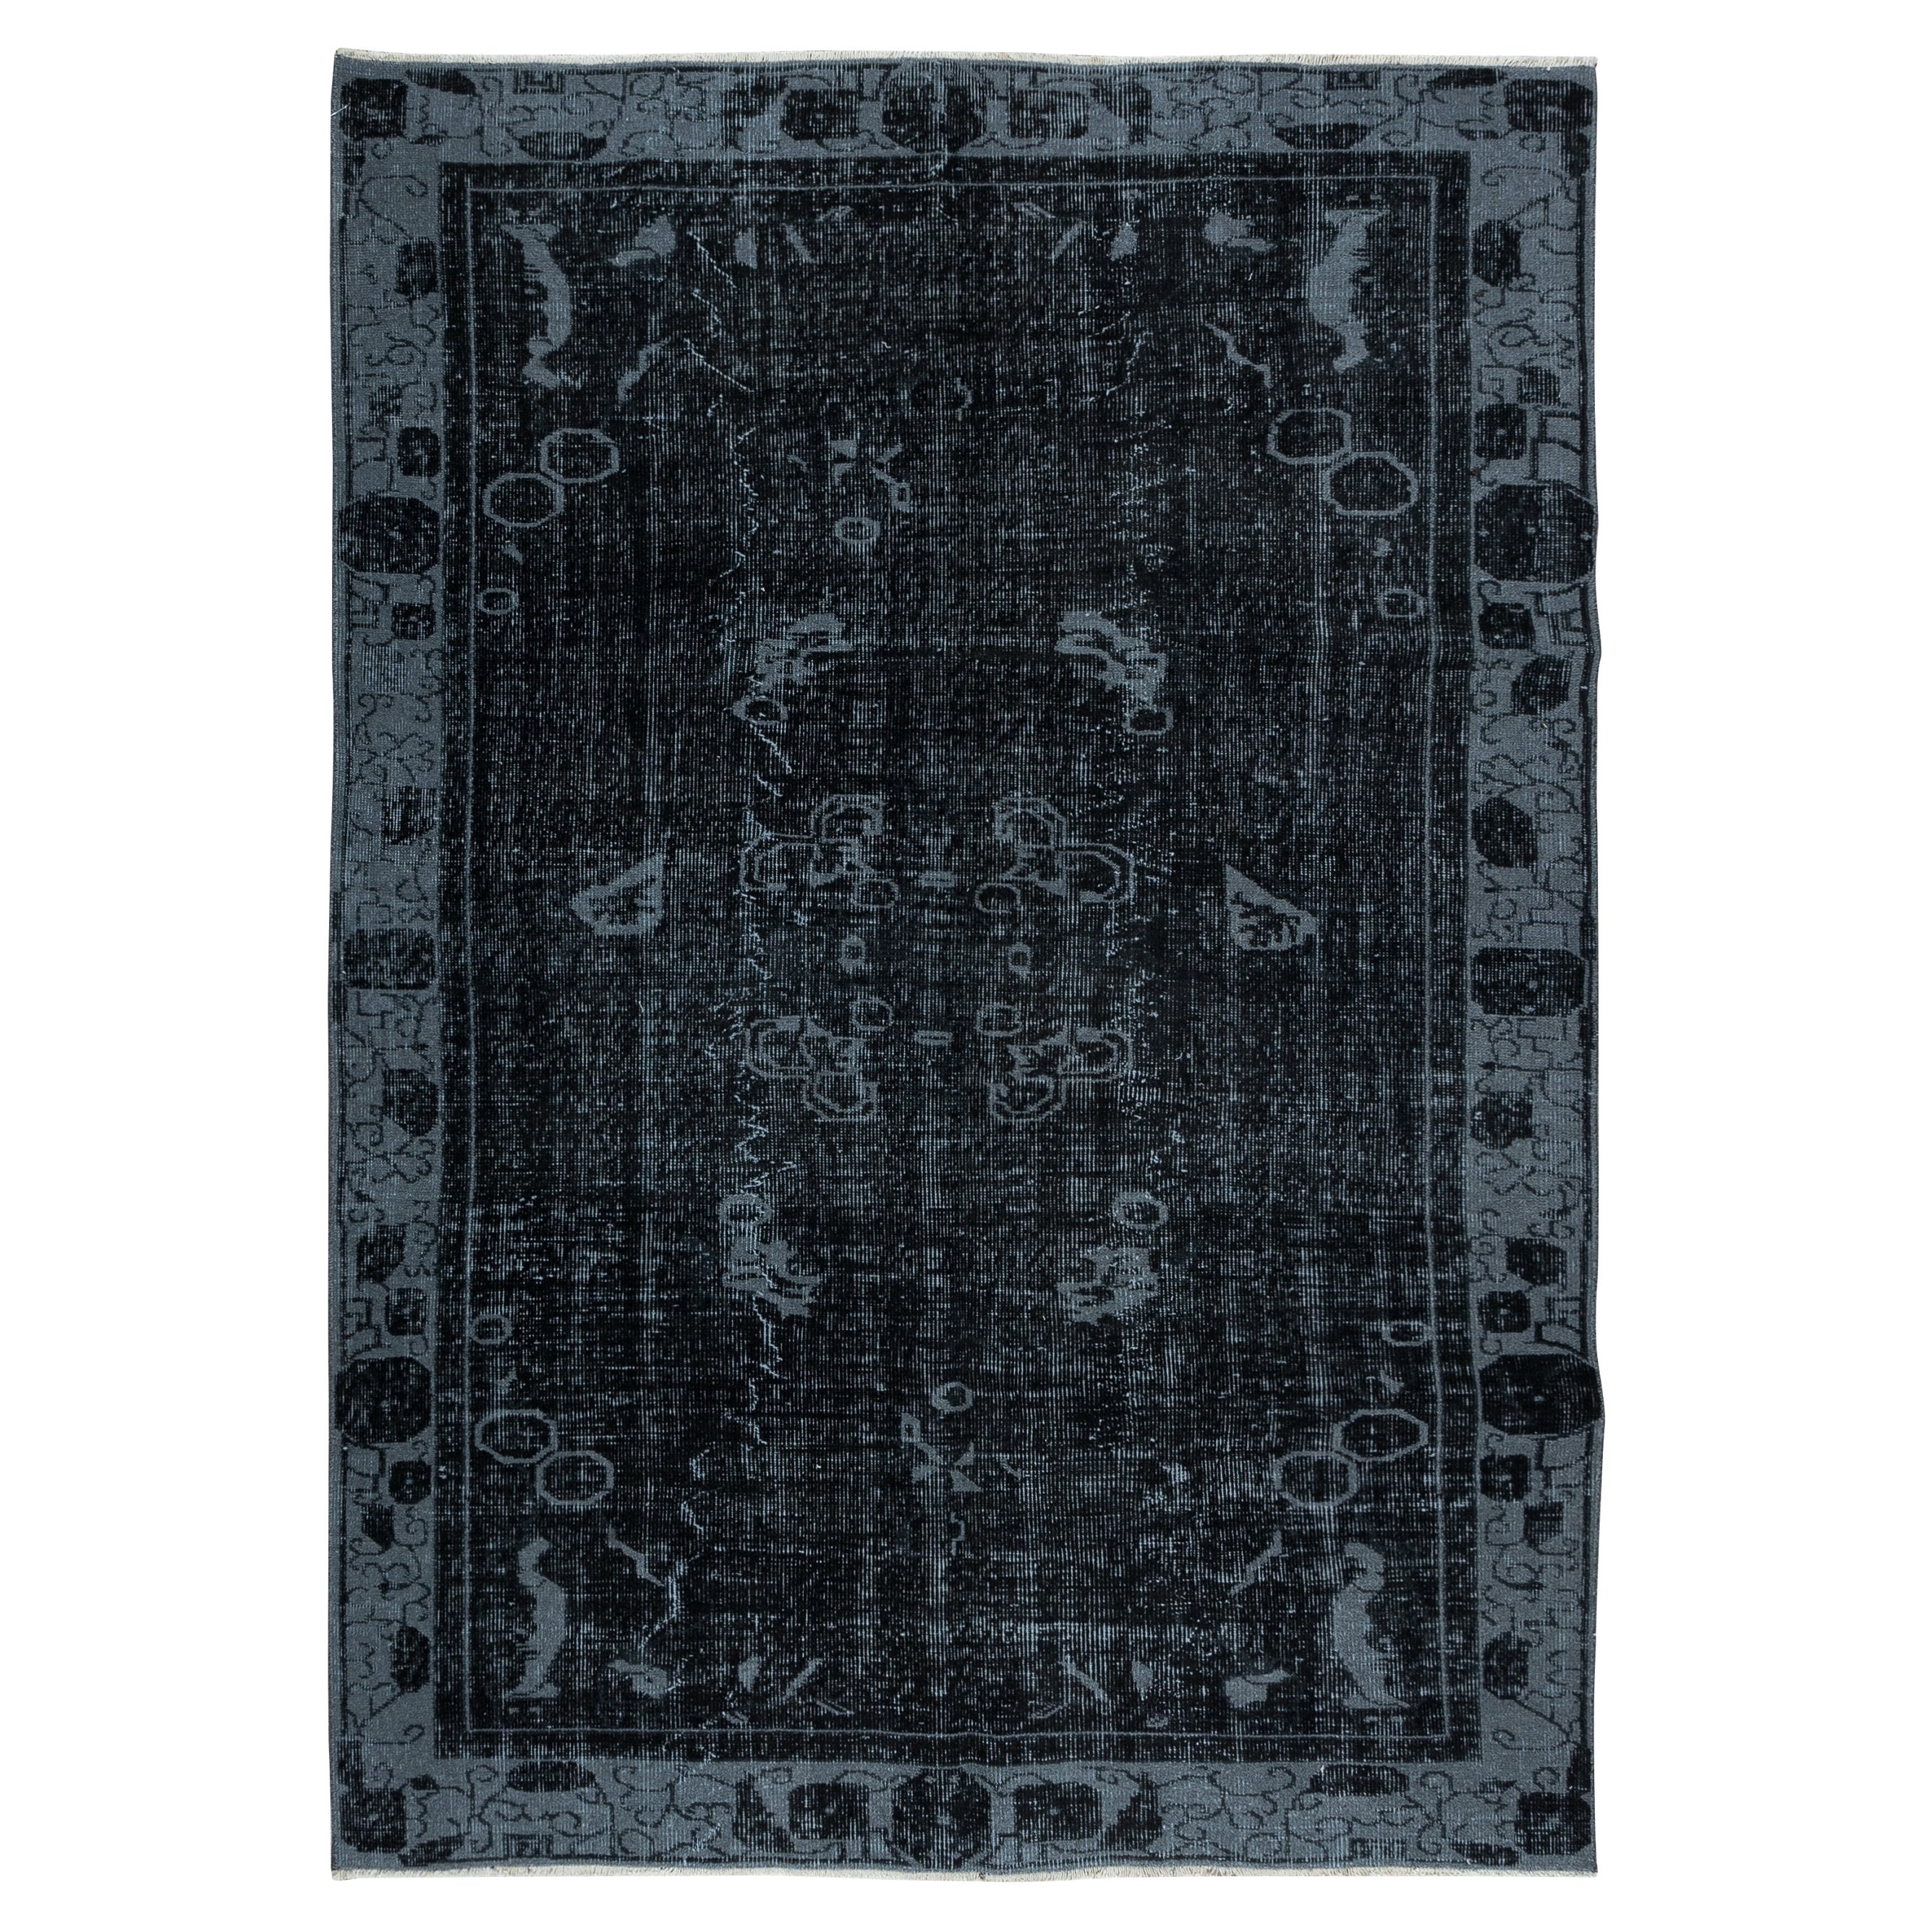 5.4x7.7 Ft Modern Black & Gray Art Deco Area Rug Hand-Knotted in Turkey